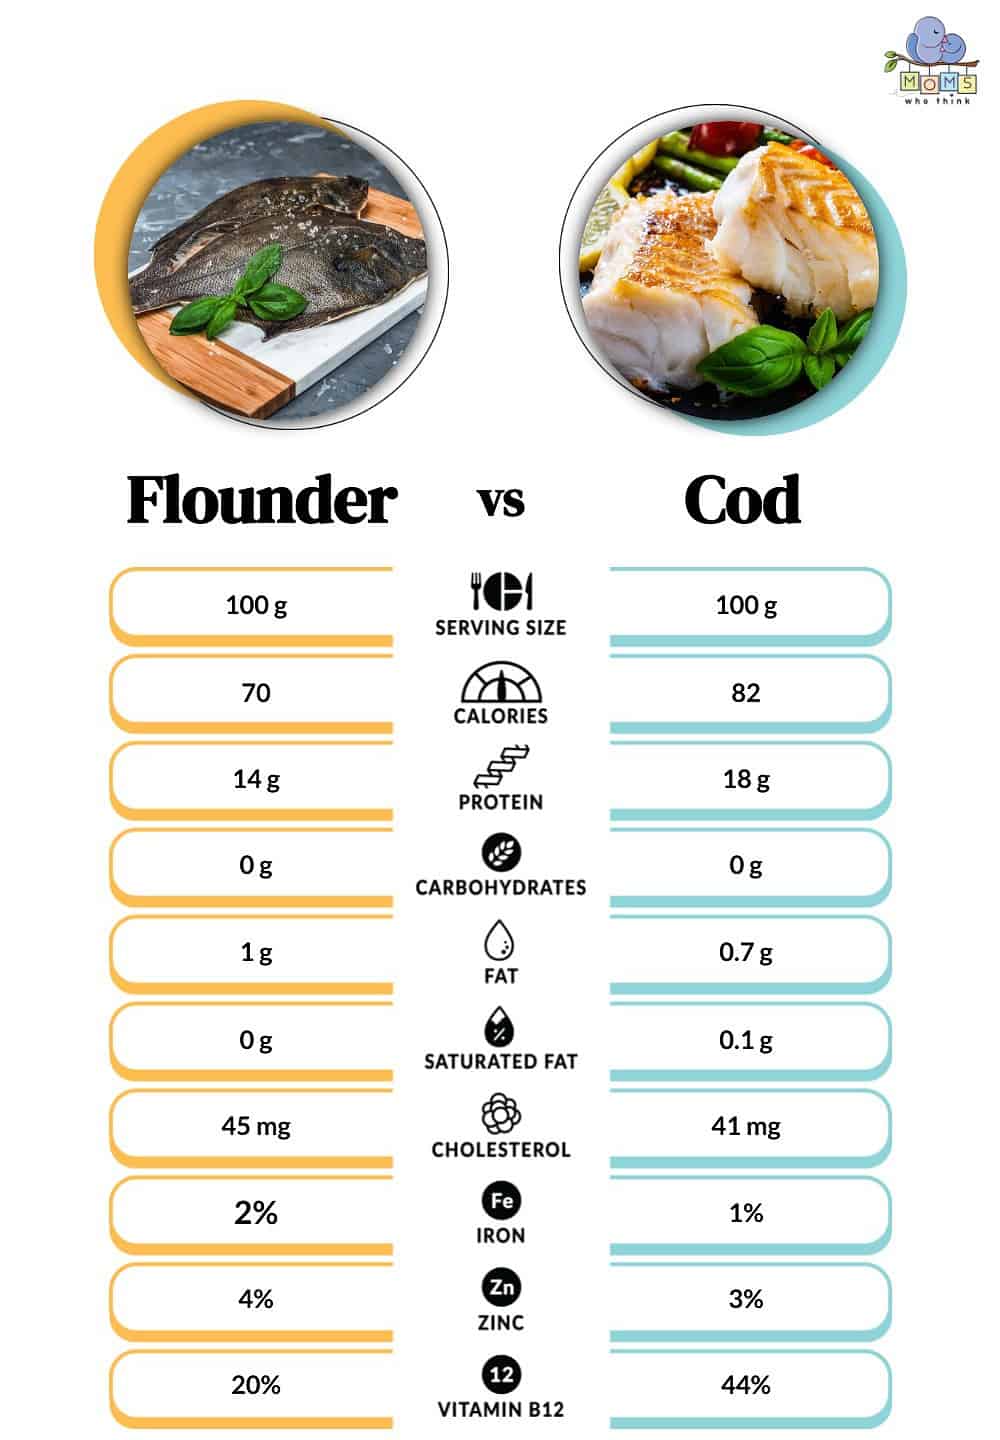 Flounder vs Cod Nutritional Facts